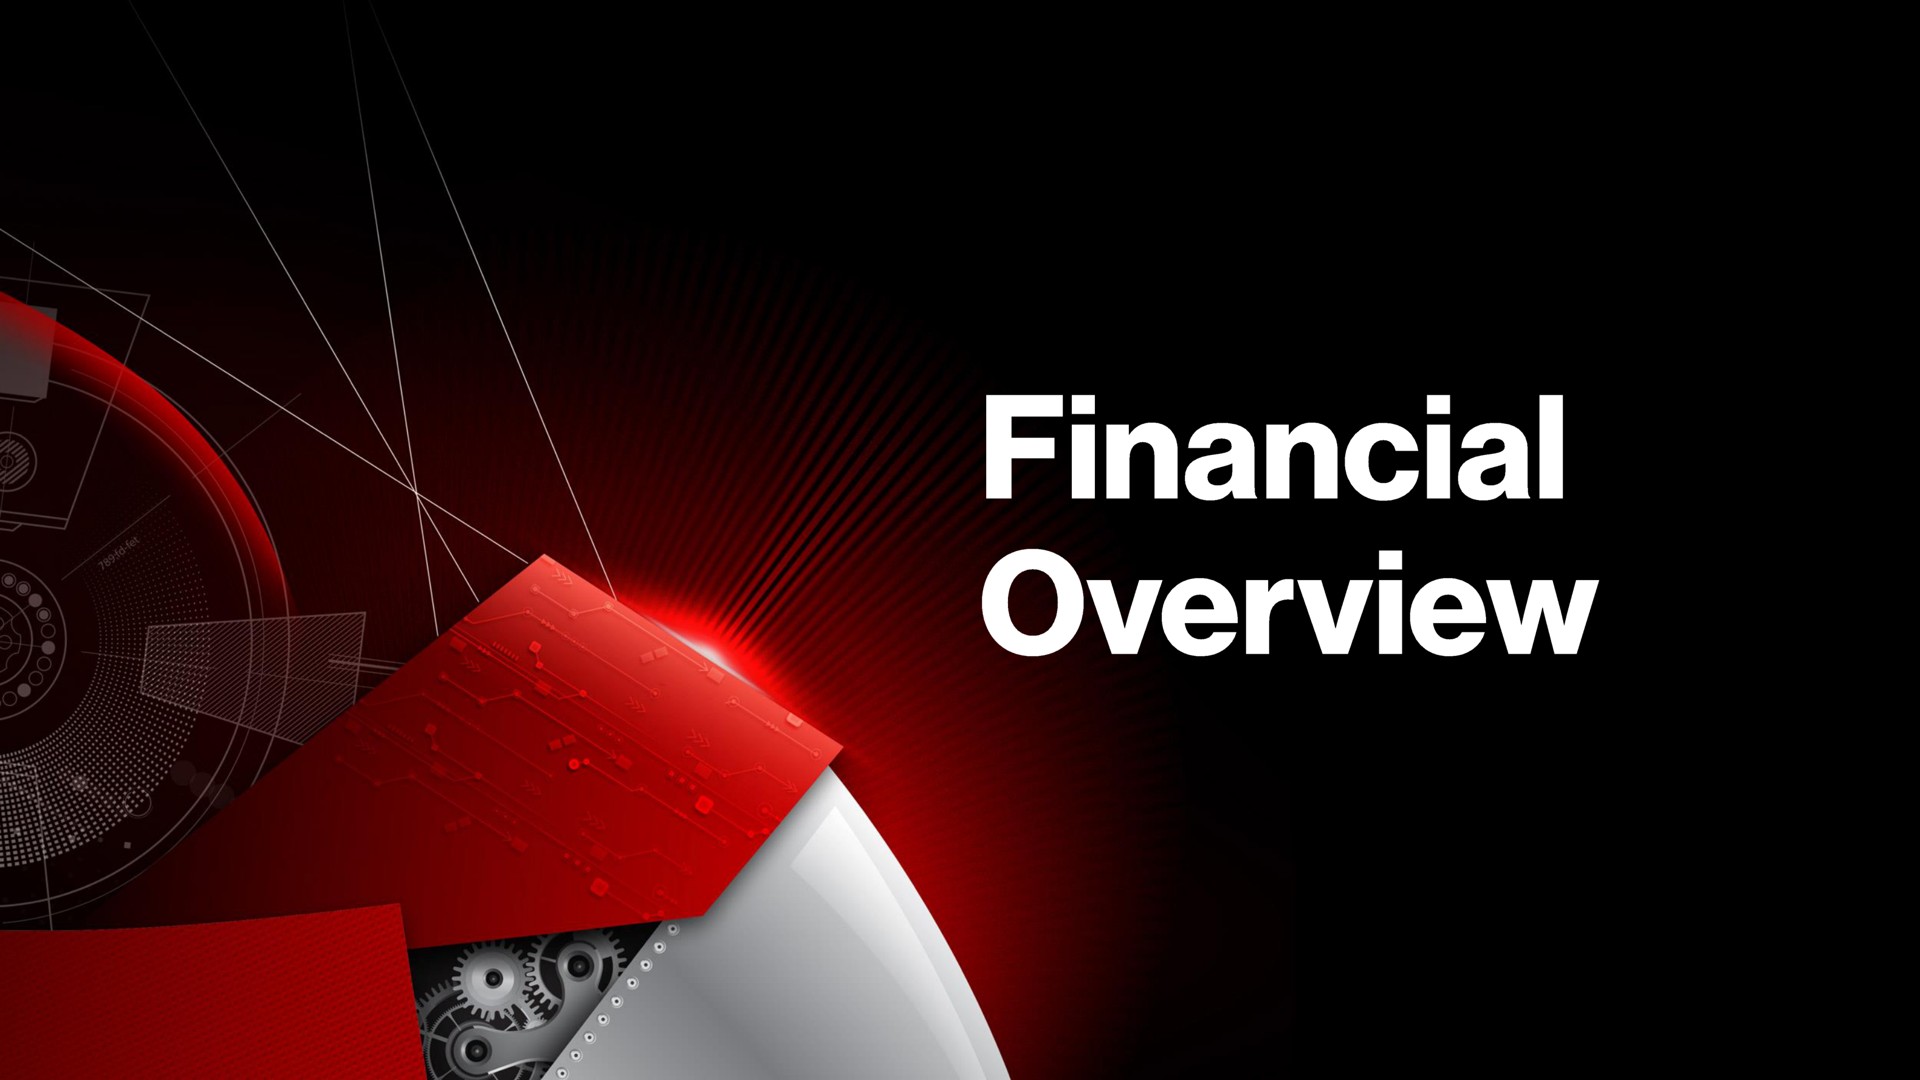 overview financial | Crowdstrike